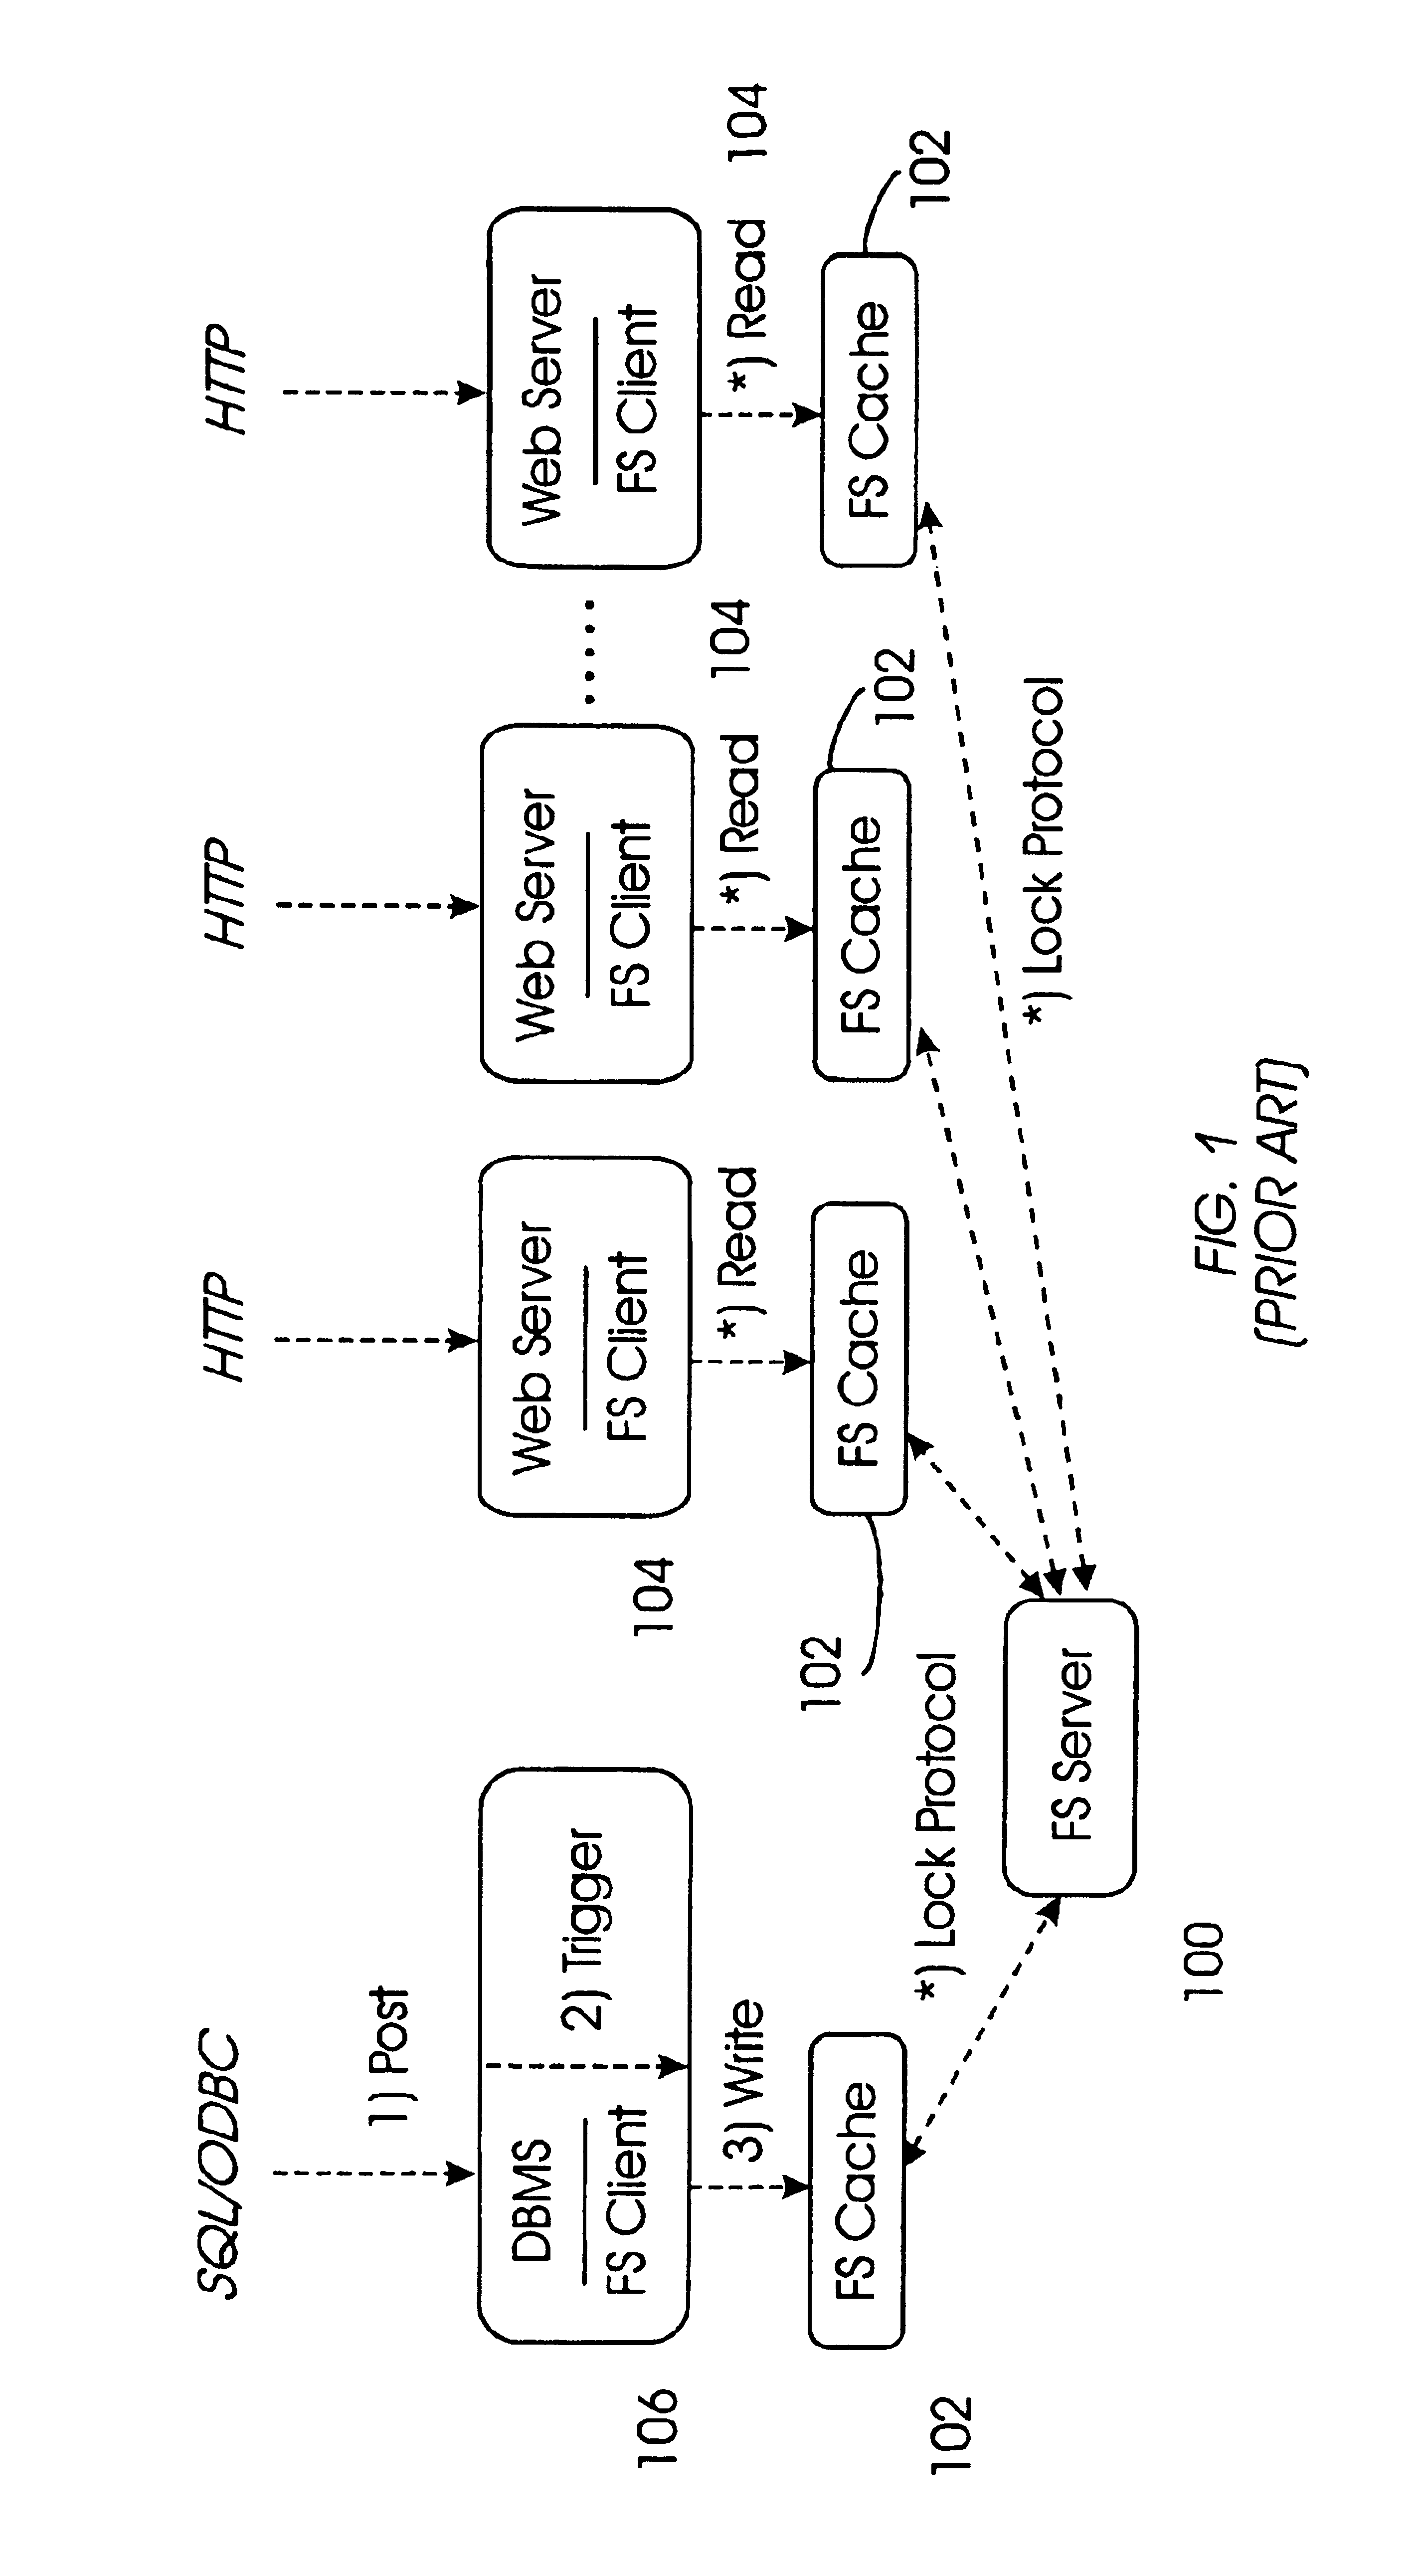 Producer/consumer locking system for efficient replication of file data